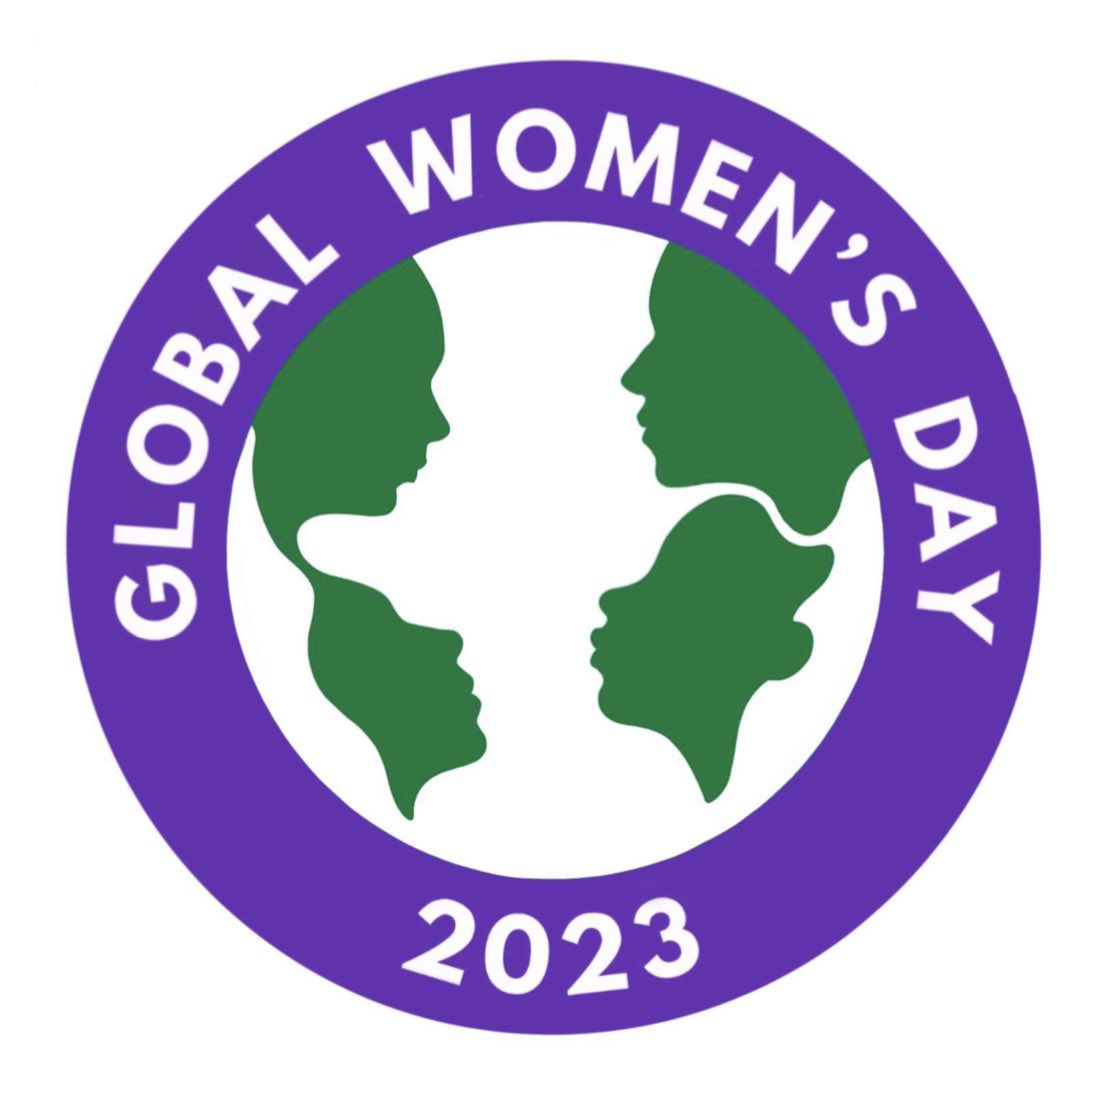 On #GlobalWomensDay we can’t share our Afghan members’ photos as it is too dangerous to even show a photo of the back of their heads. However, we are celebrating and wish women everywhere a wonderful, united celebration.

Please keep #afghanwomen in your hearts and minds today.